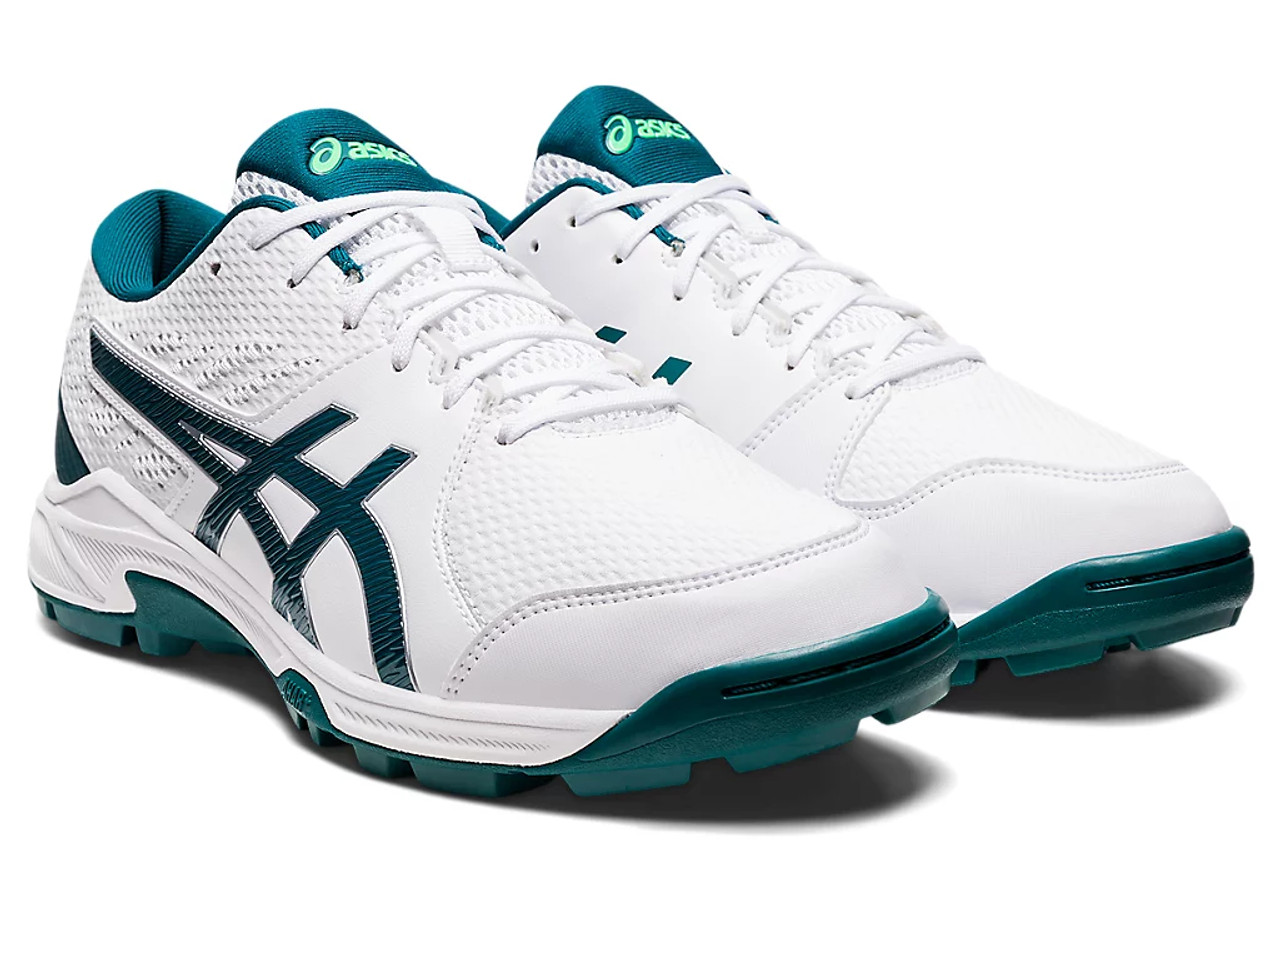 ASICS Wrestling Shoes 1083A001 White Gold Edge white All sizes can be  produced | eBay